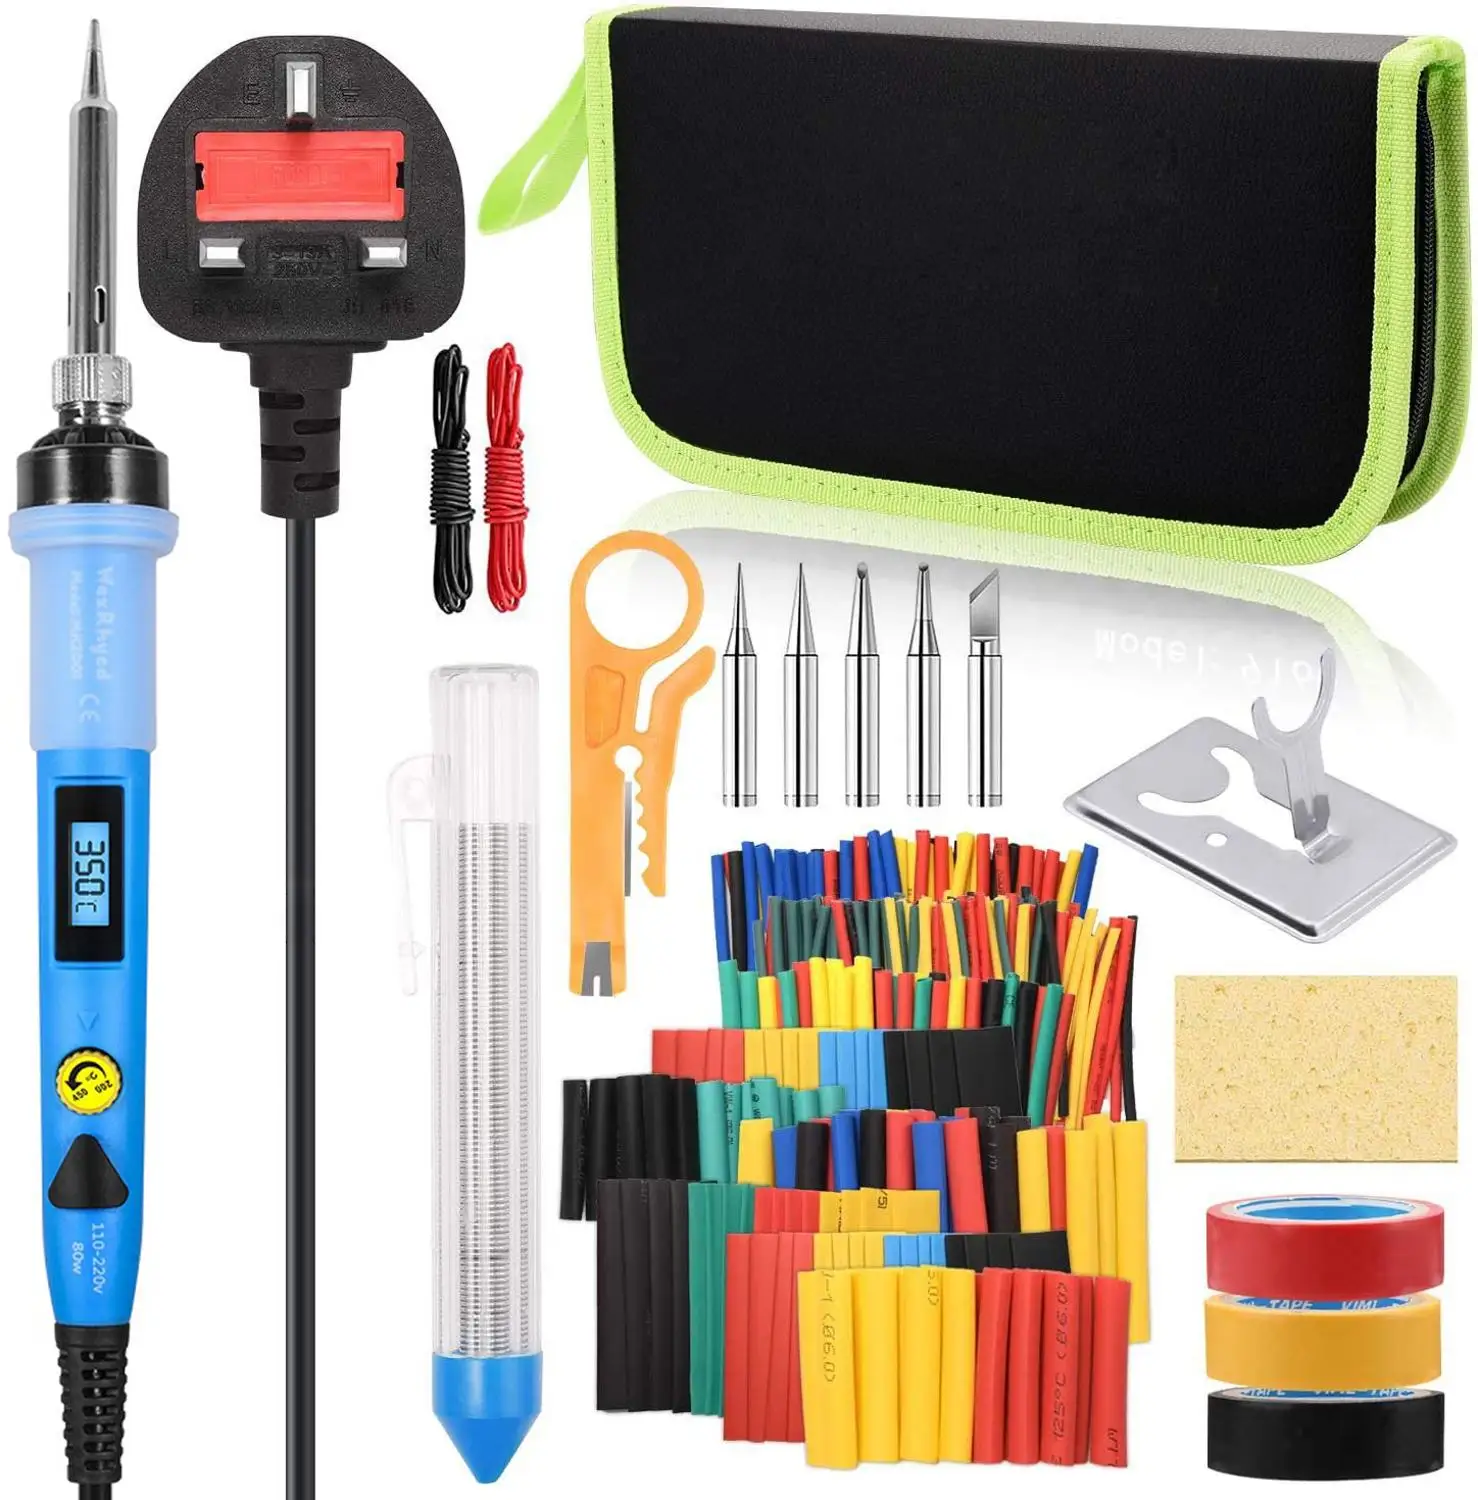 

60W/80W Digital Soldering Iron kit, Adjustable Temperature, with 328pcs Heat Shrink Tubing, Insulating Tape, Welding iron tools